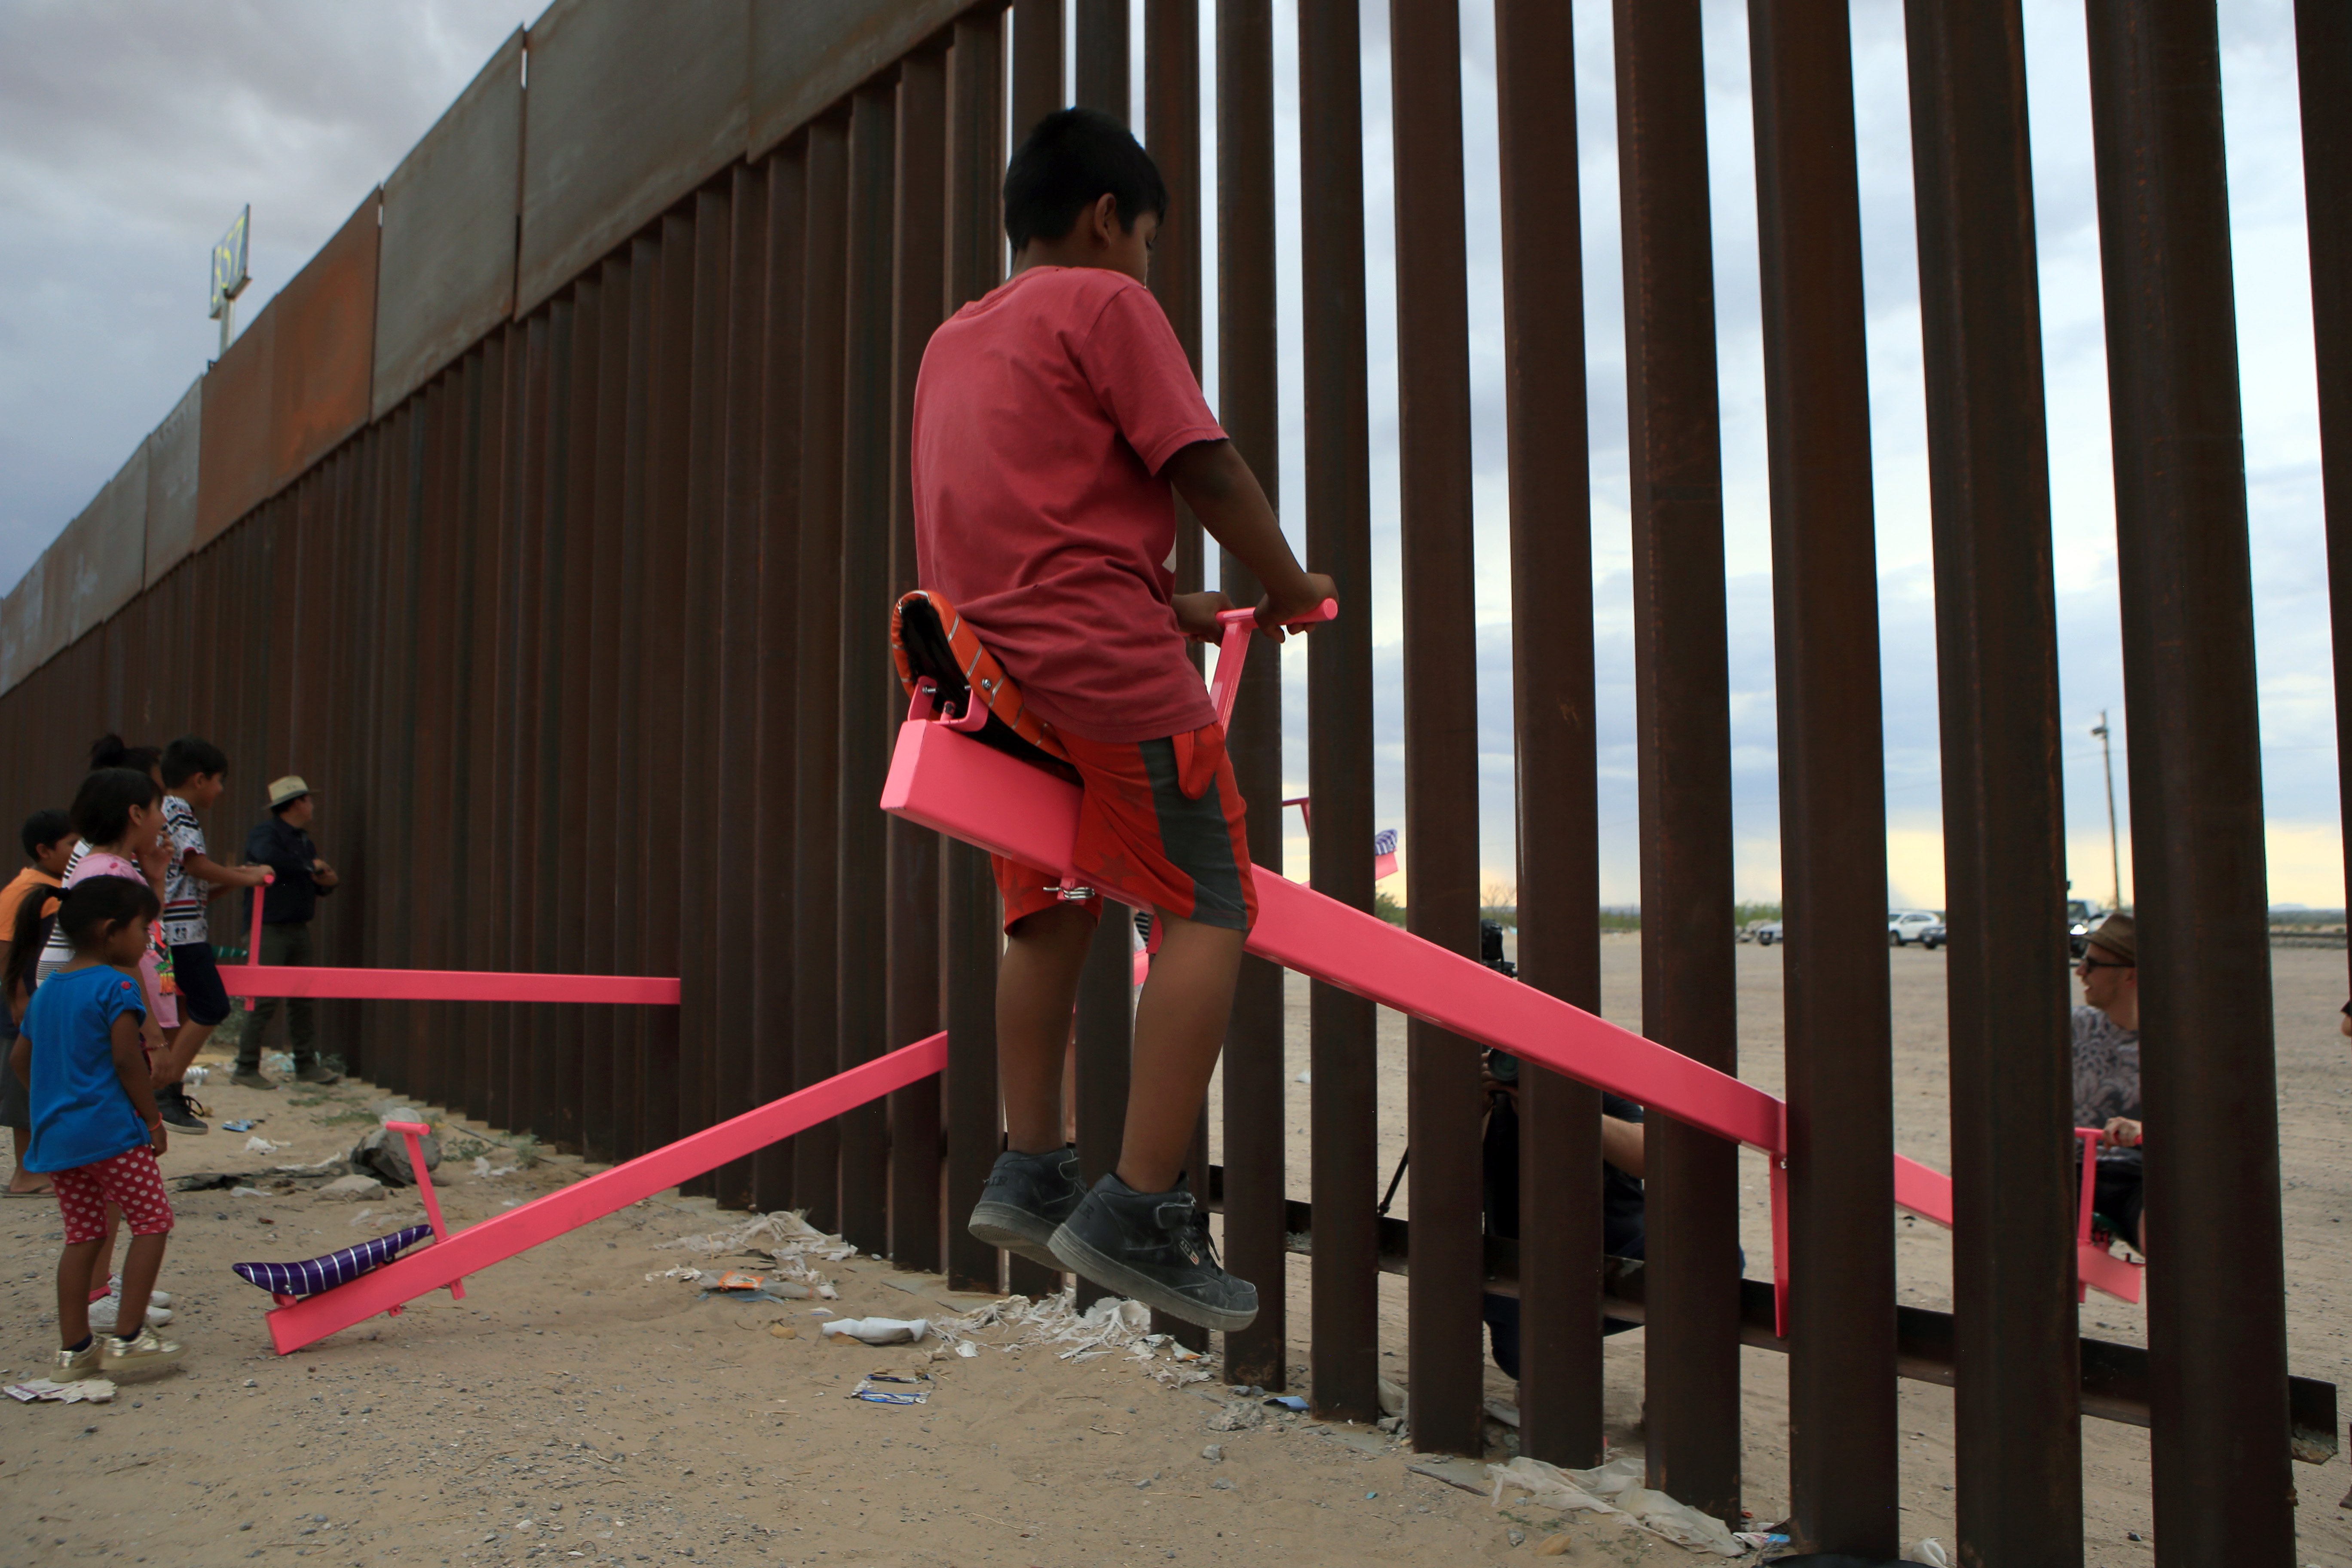 Artists Briefly Bridge the US-Mexico Border With a ...